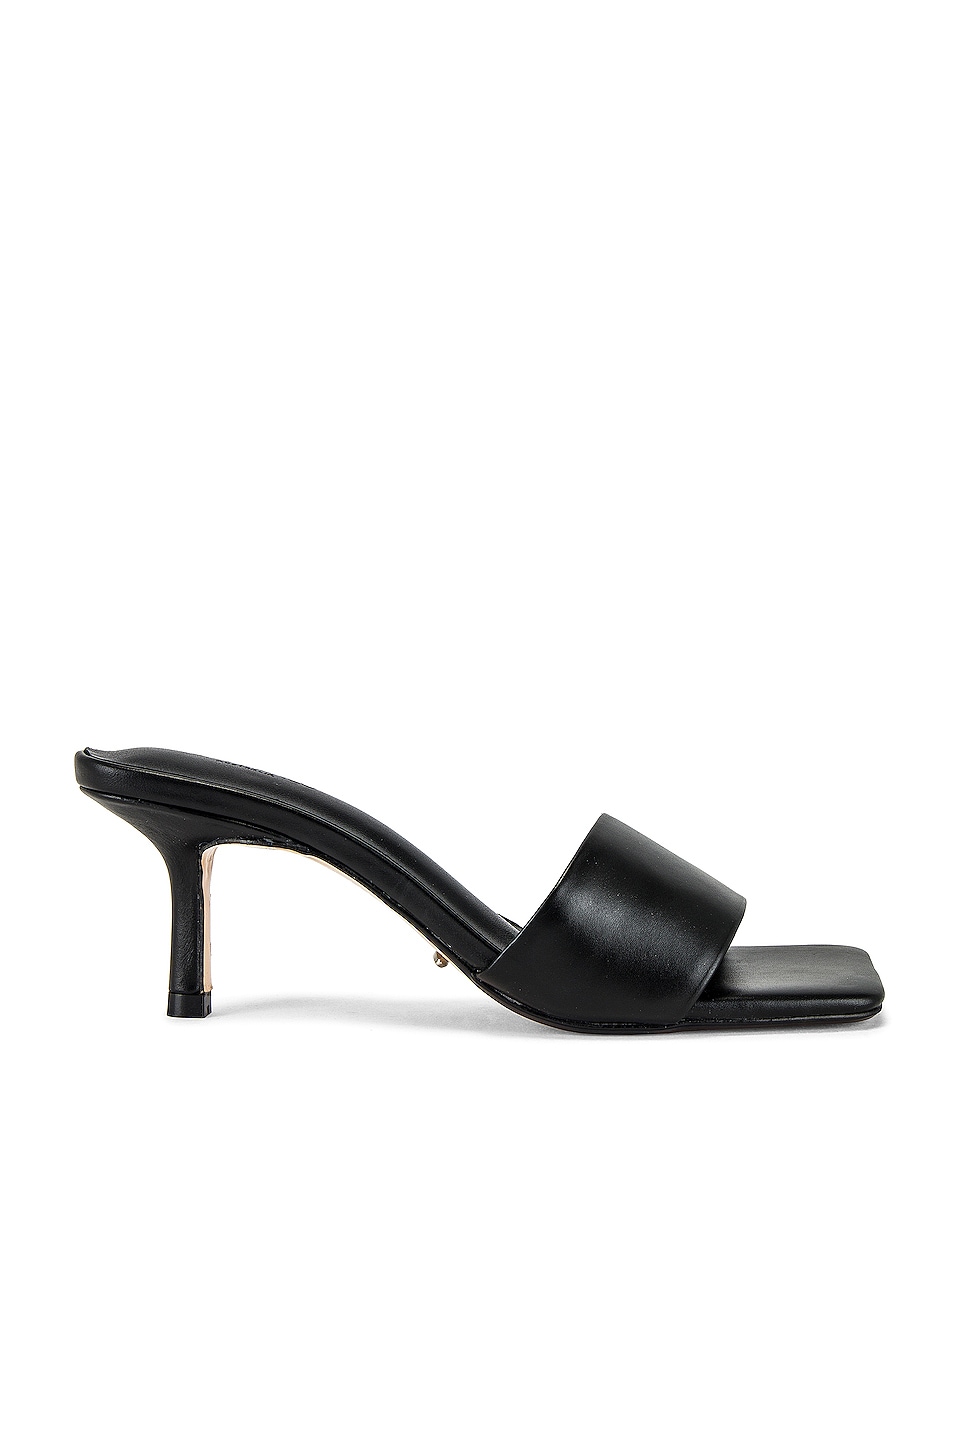 Tony Bianco Aaliyah Mule in Biscuit Capretto | REVOLVE